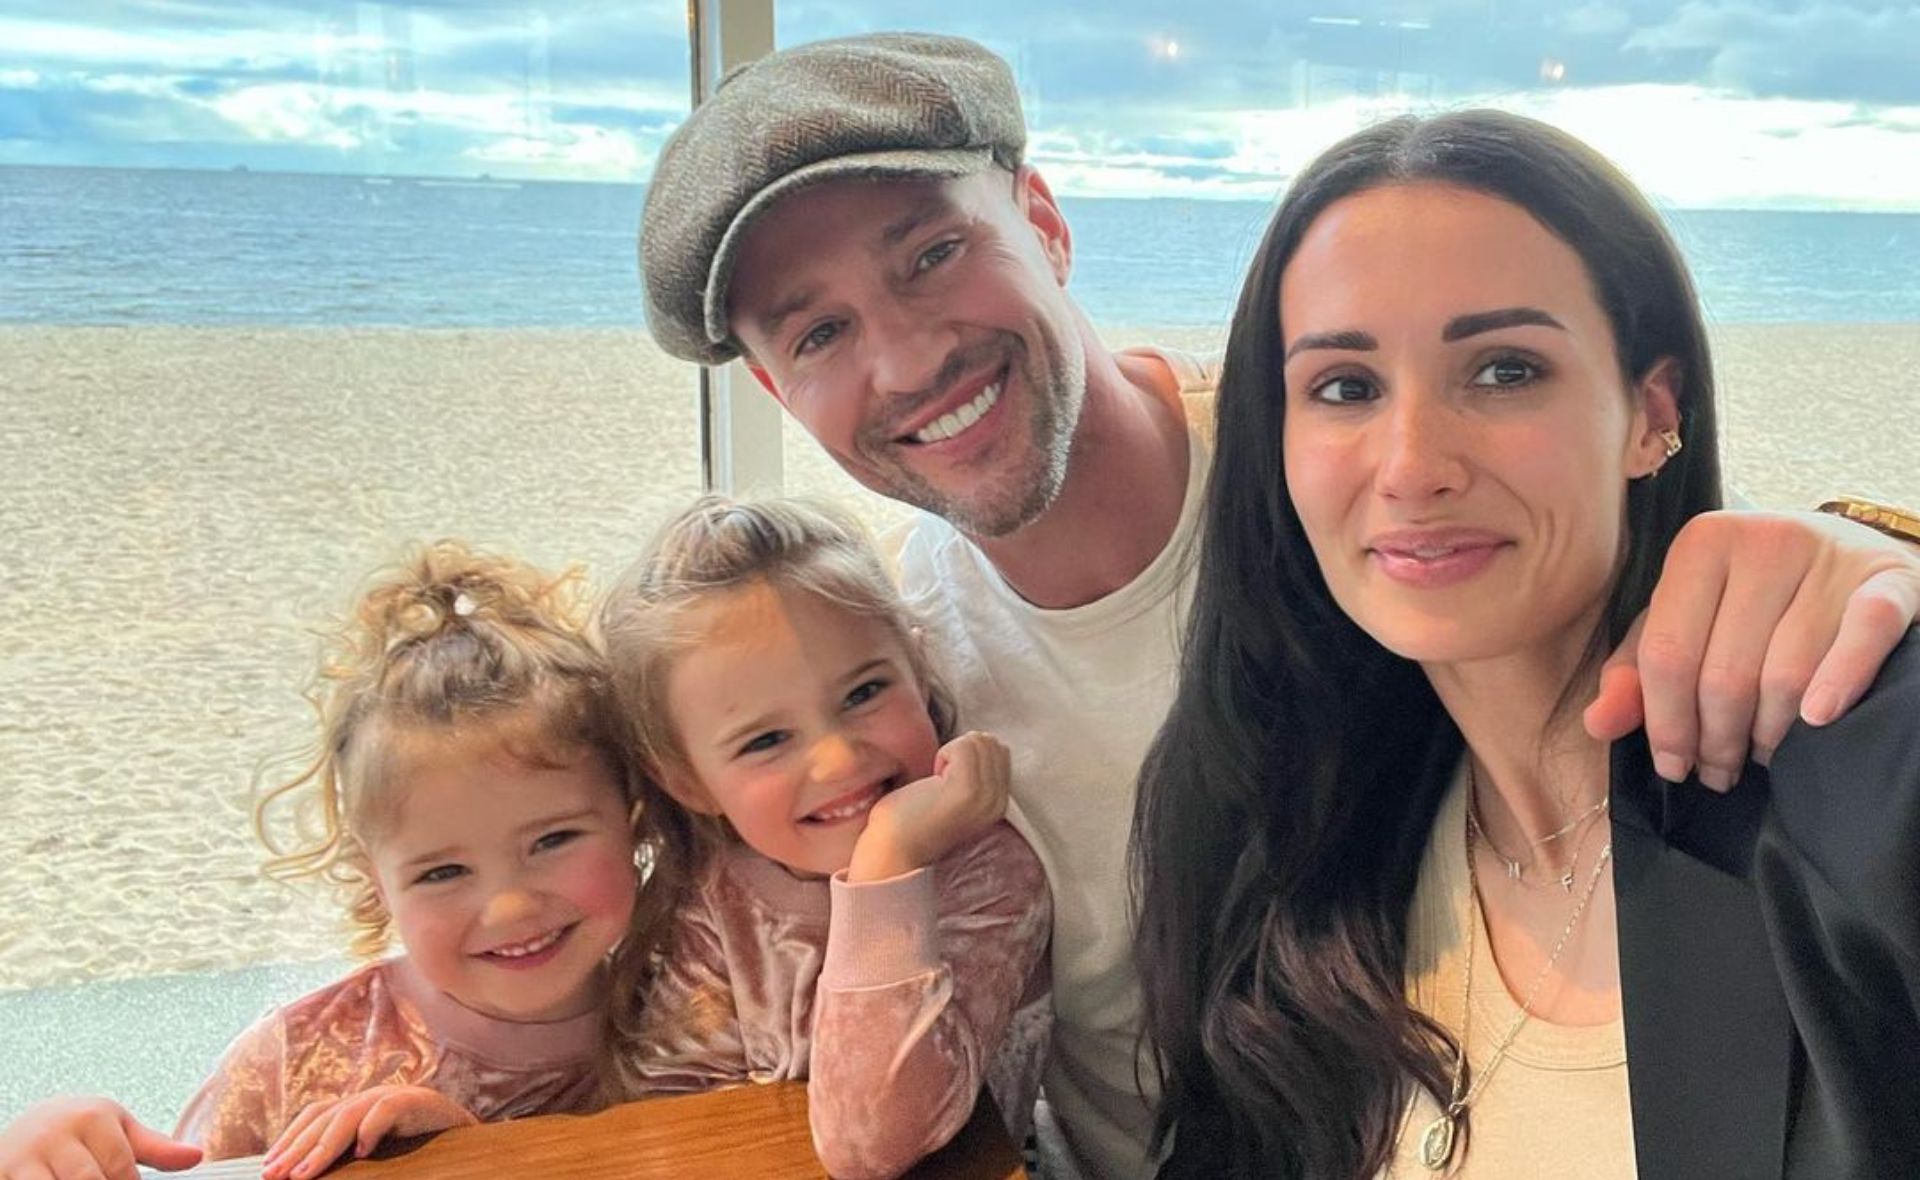 The hilarious moment Kris Smith is left speechless after a cheeky comment from his daughter